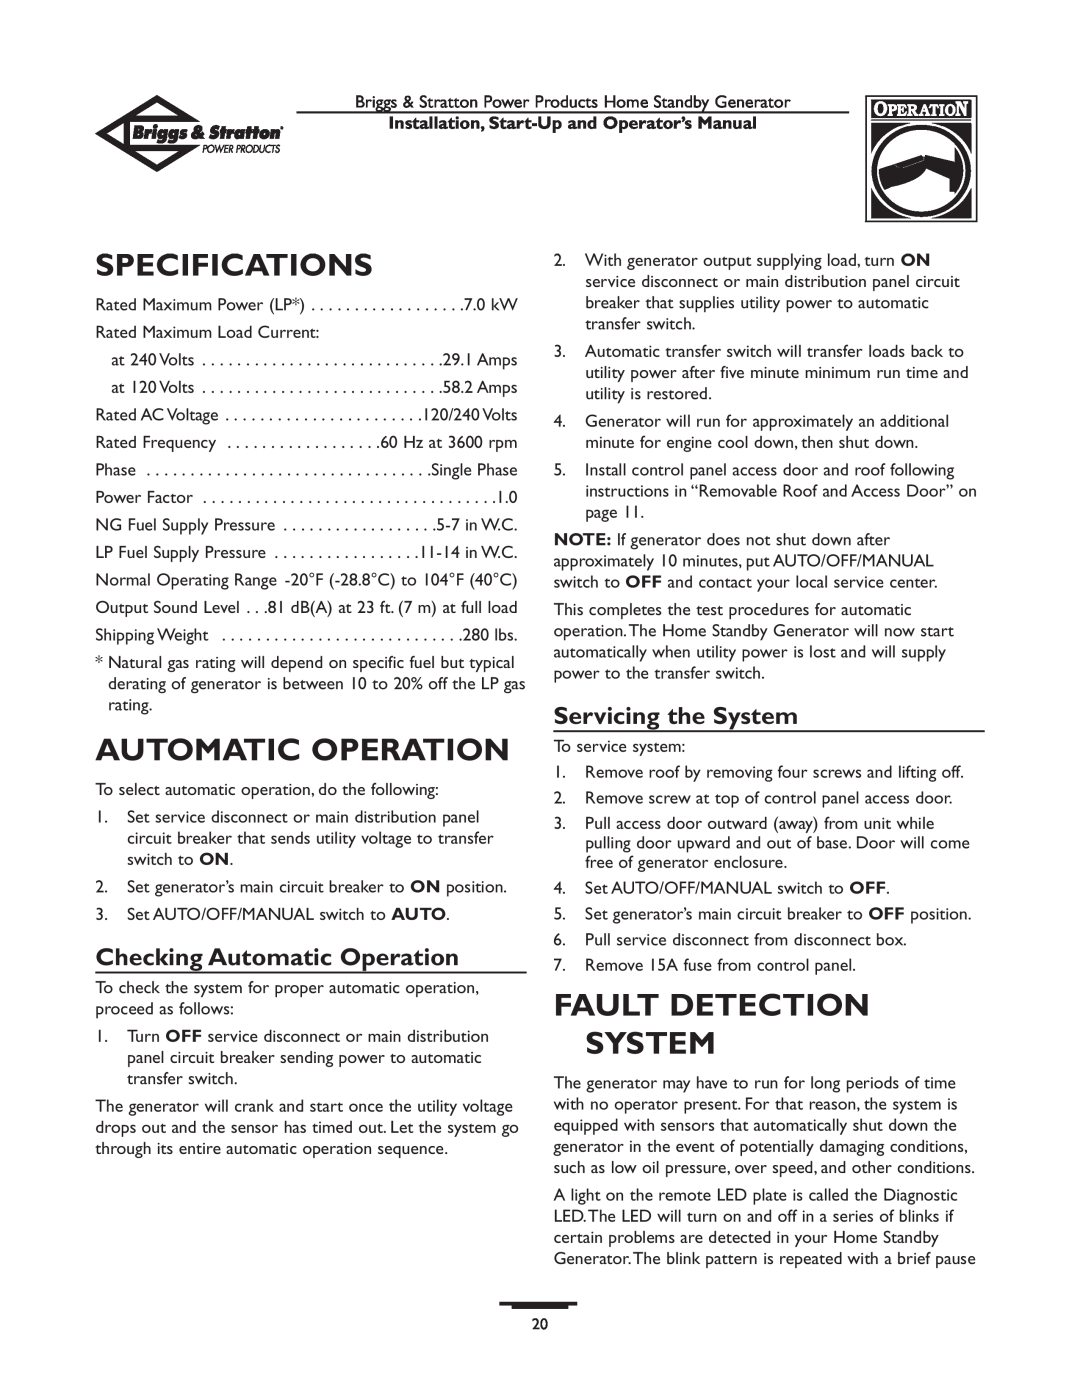 Briggs & Stratton 01897-0 manual Specifications, Automatic Operation, Fault Detection System, Servicing the System 